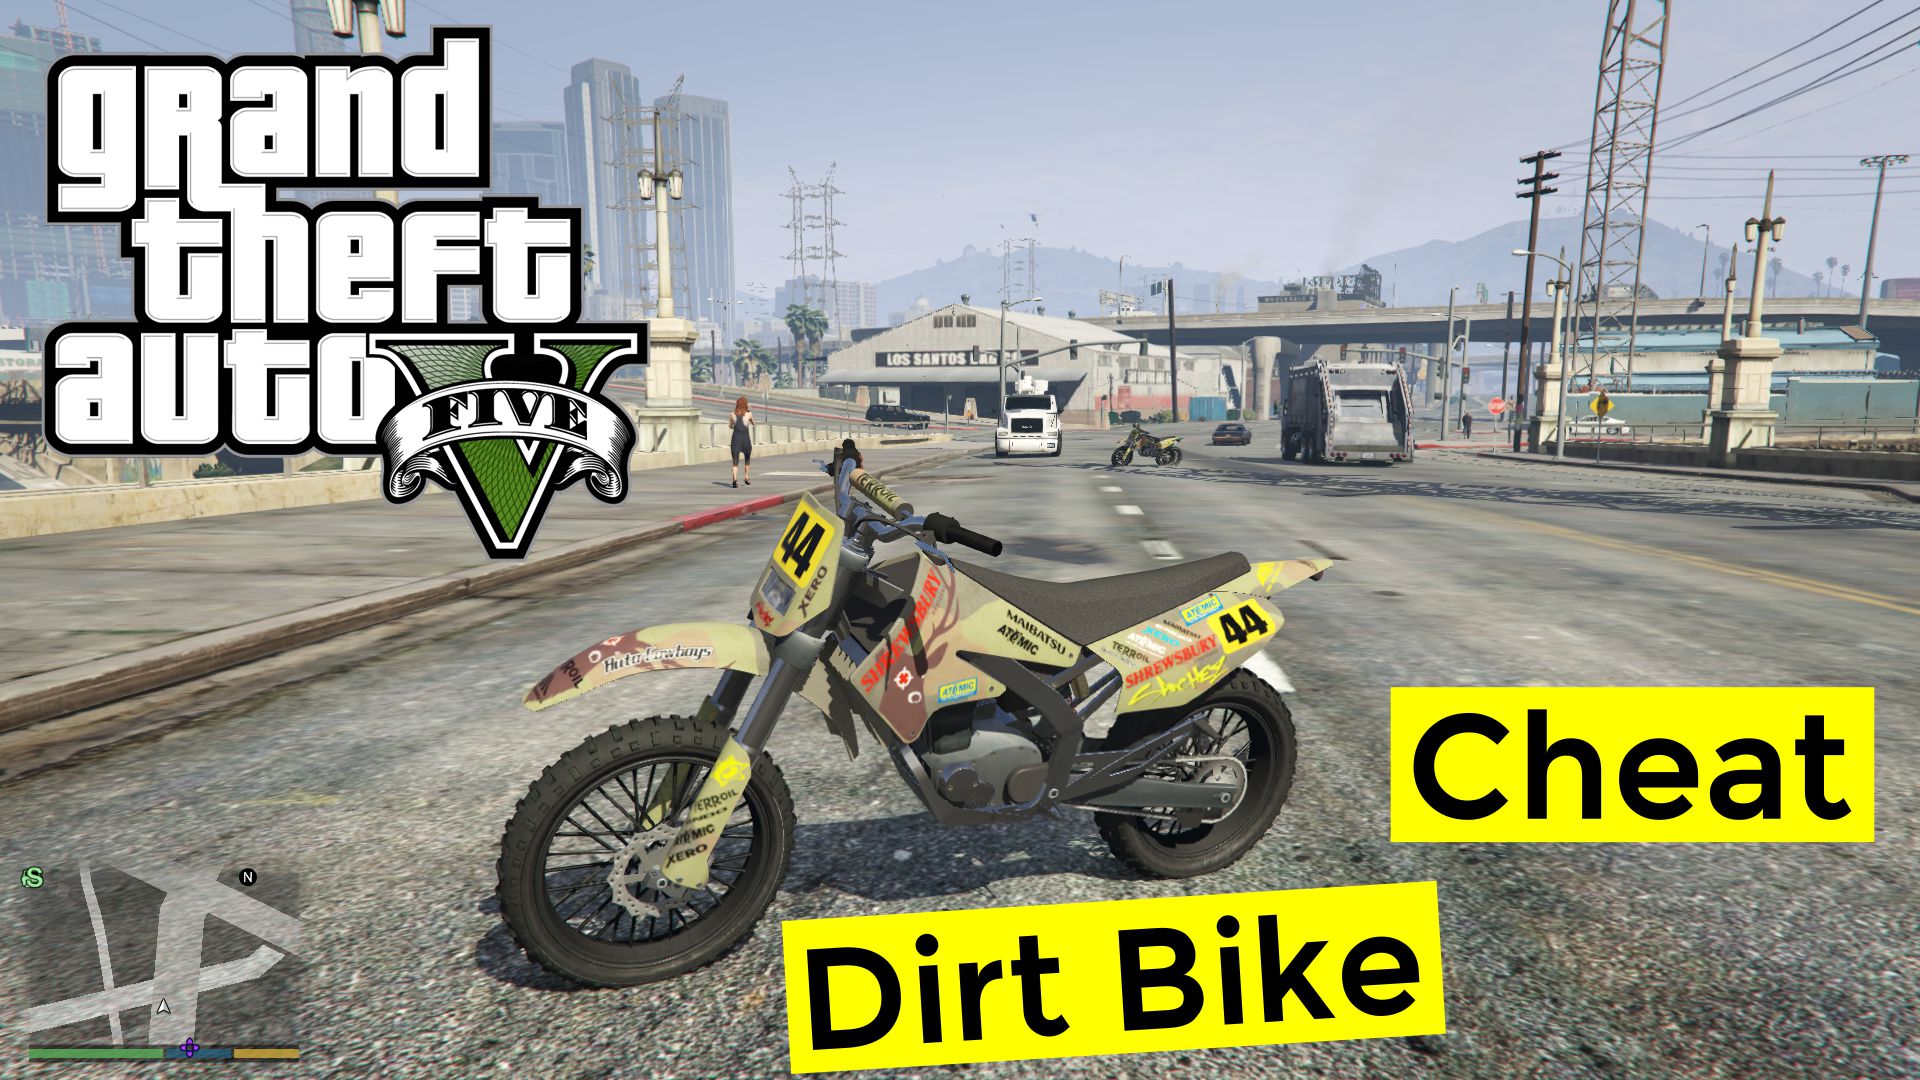 cheat for dirt bike in GTA 5 PC, Xbox, Playstation